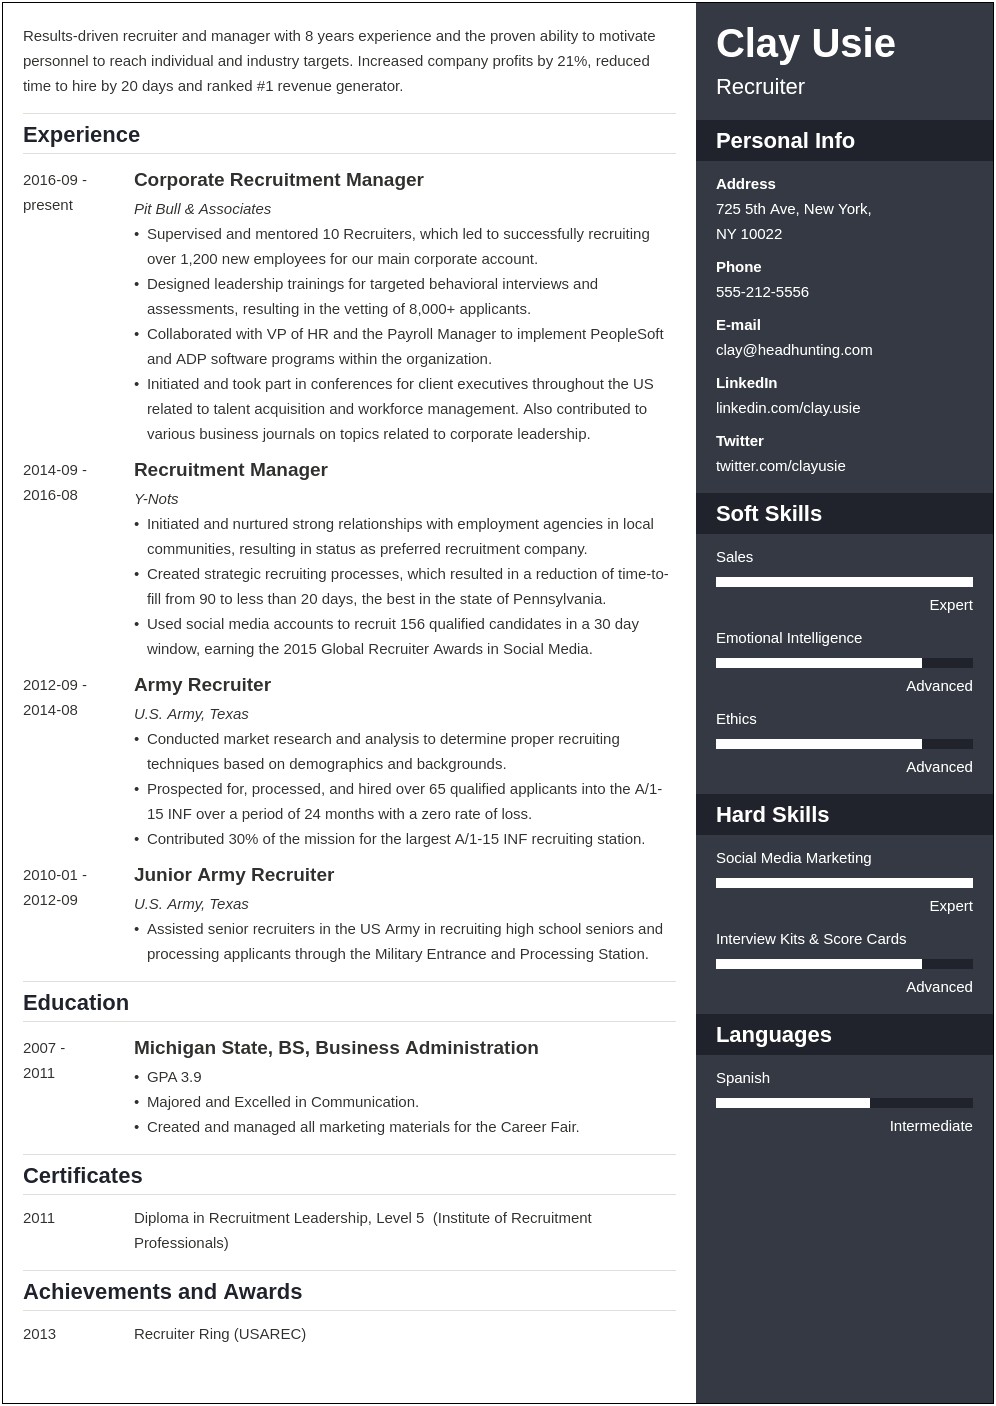 Hybrid Resume Examples For Entry Level Recruiters